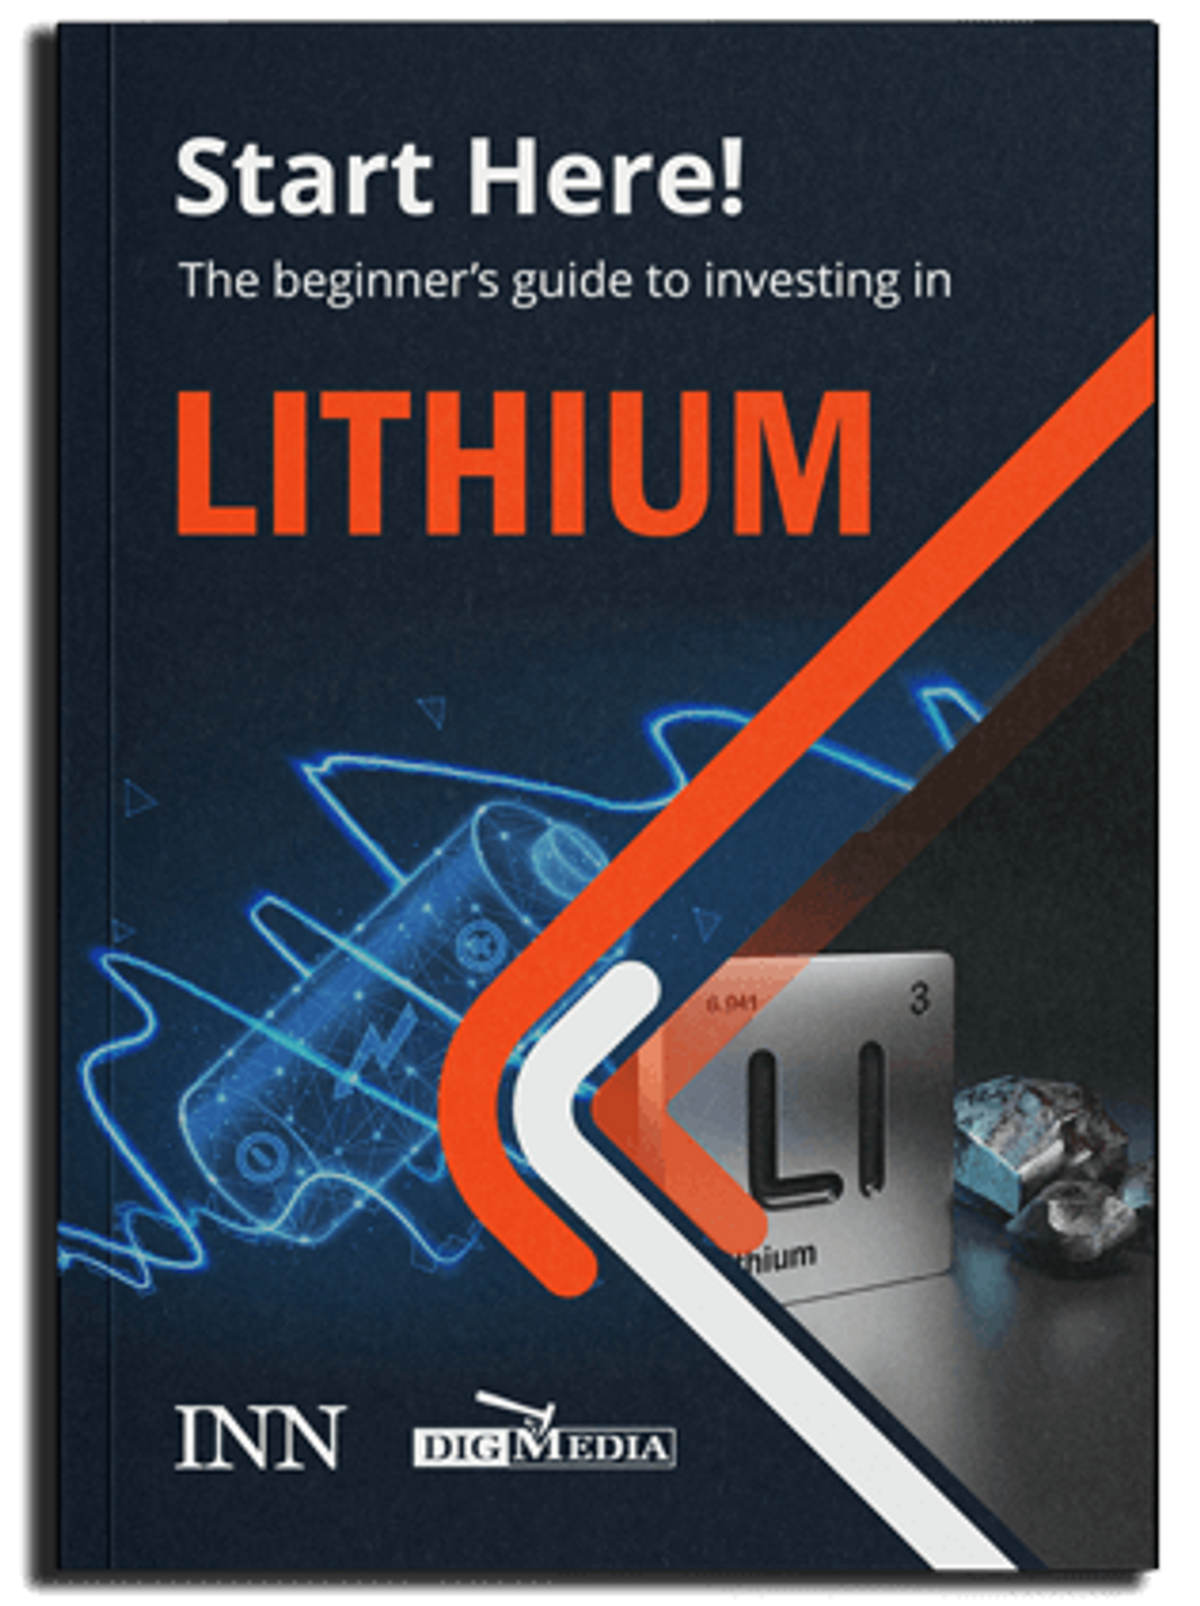 The Beginner's Guide to Investing in Lithium